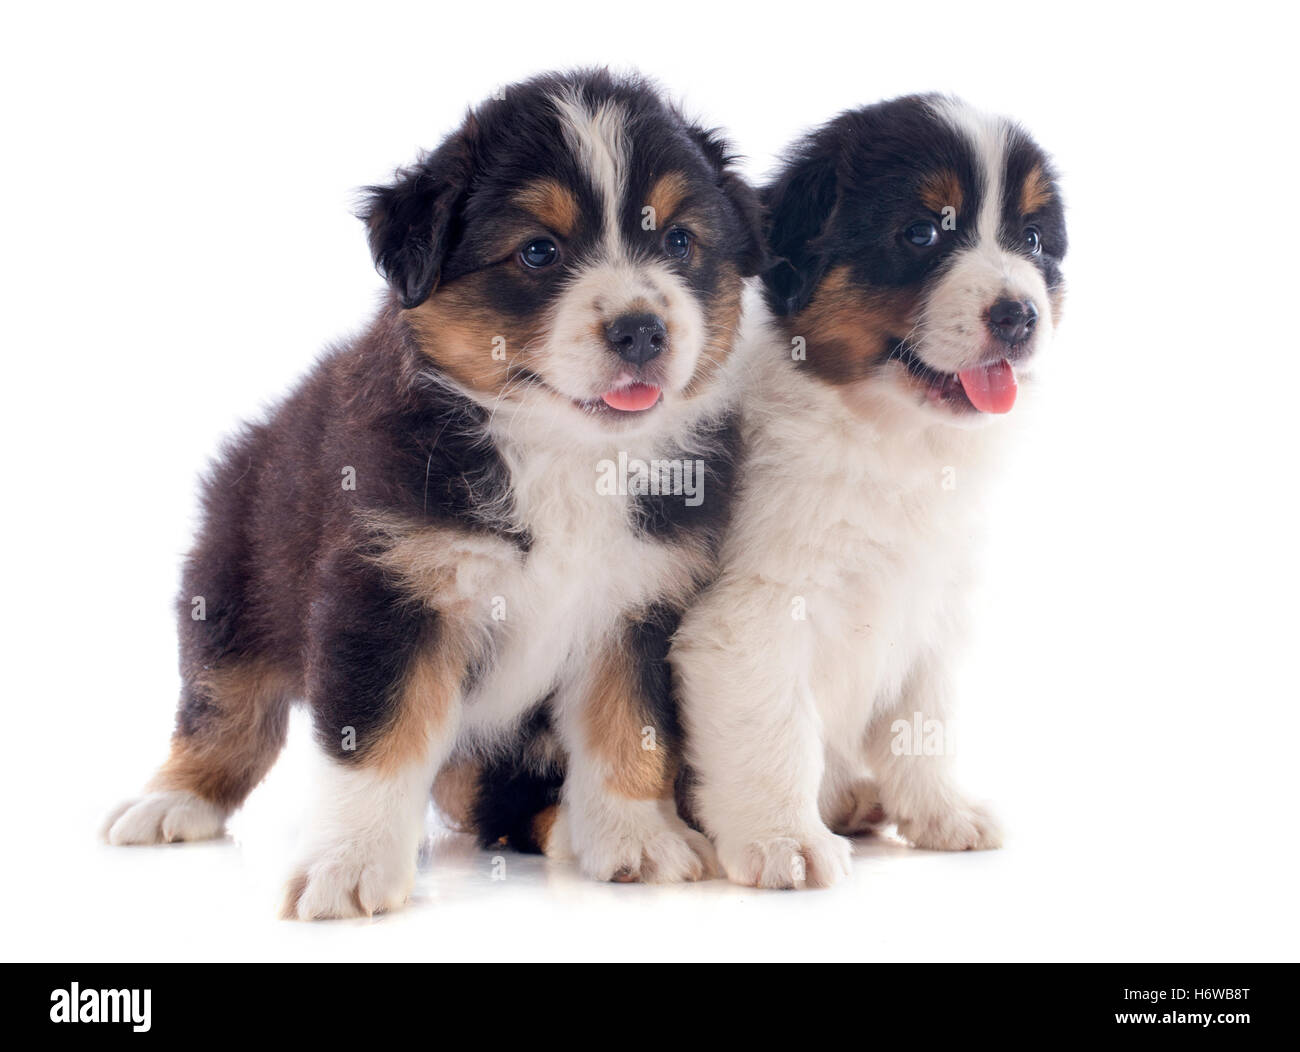 dog studio dogs puppy one canine delighted unambitious enthusiastic merry radiant with joy joyful glad carefree happy Stock Photo